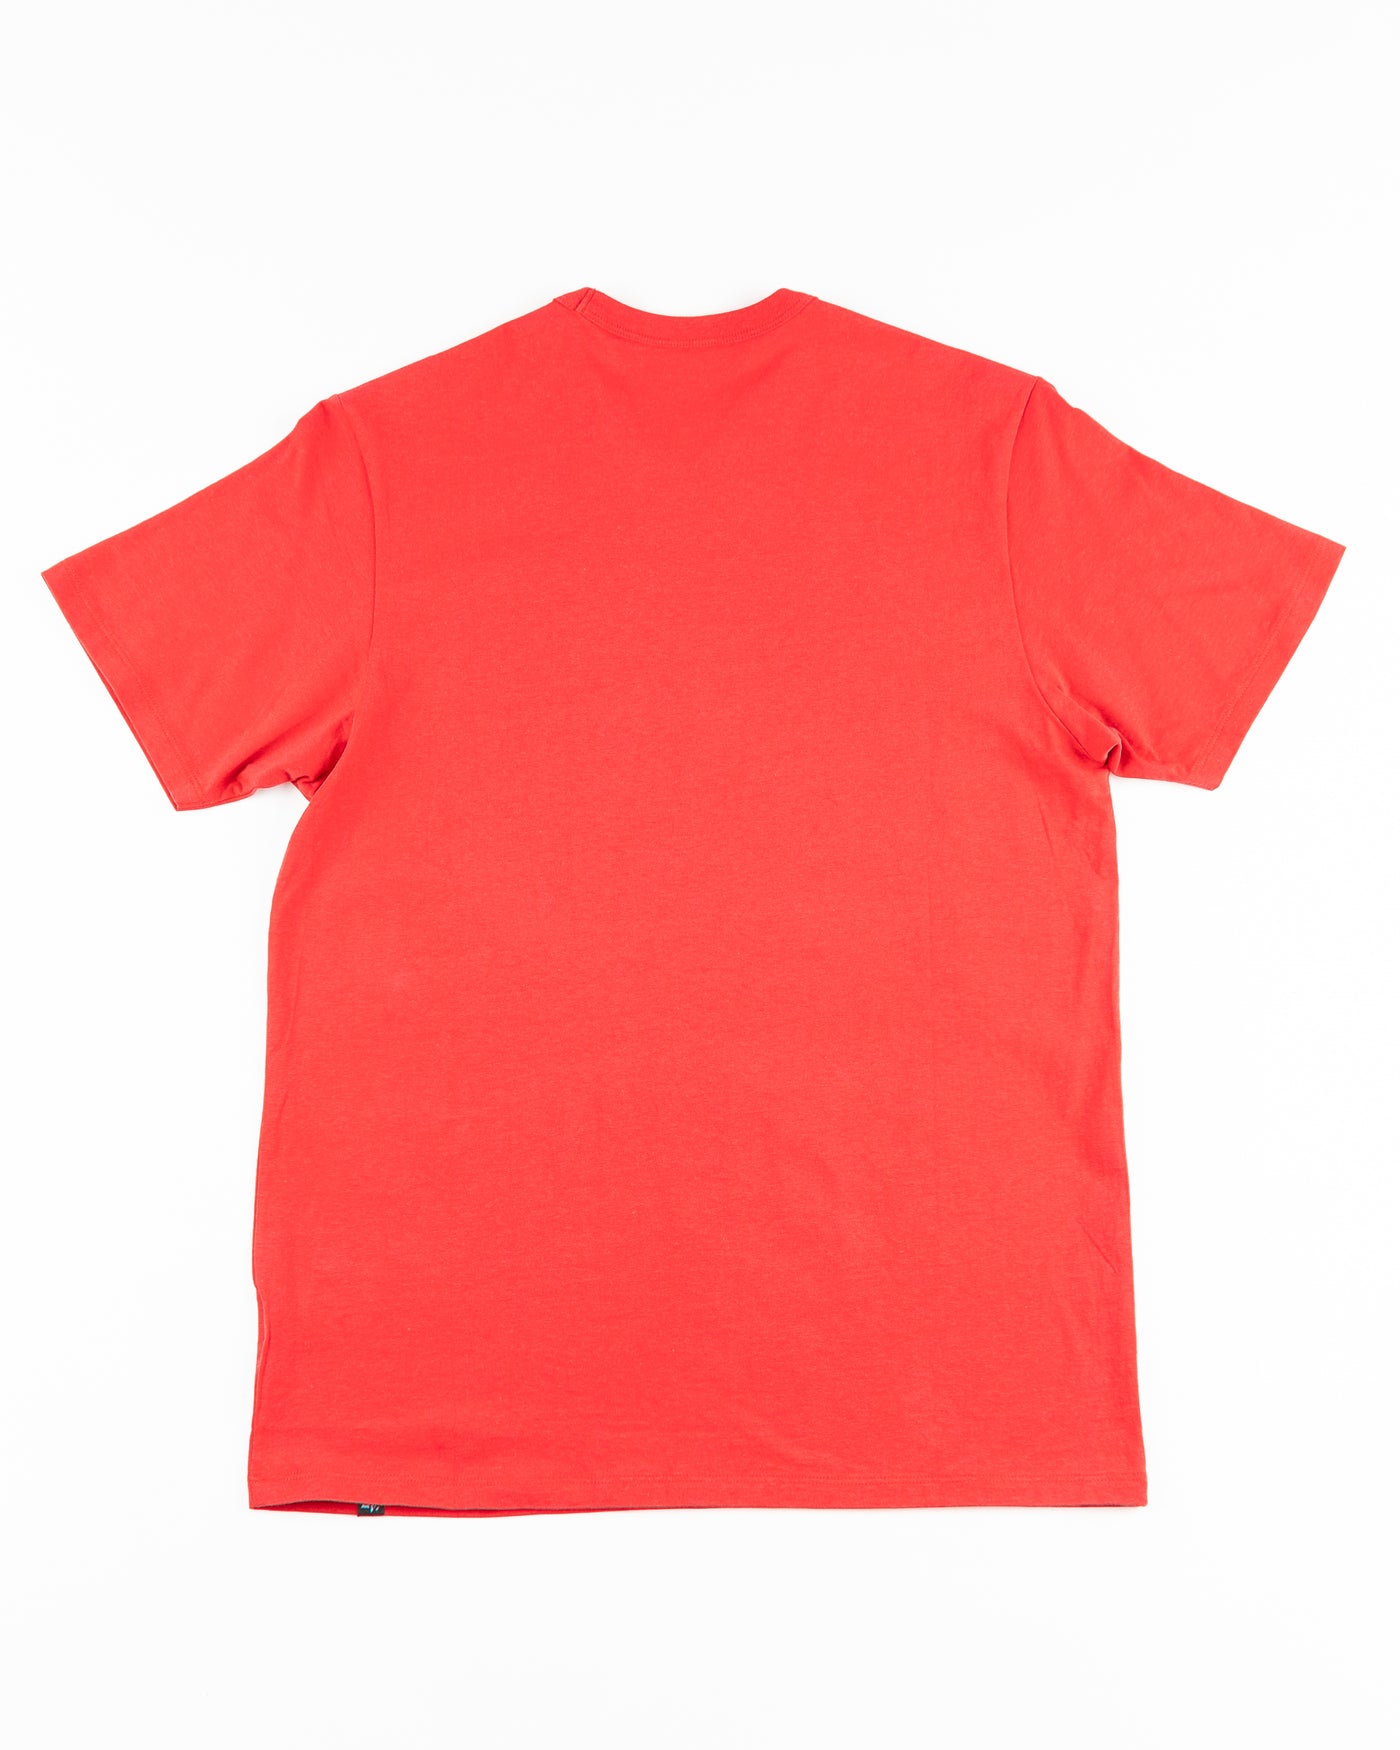 '47 brand red short sleeve tee with Chicago Blackhawks graphic across front - back lay flat